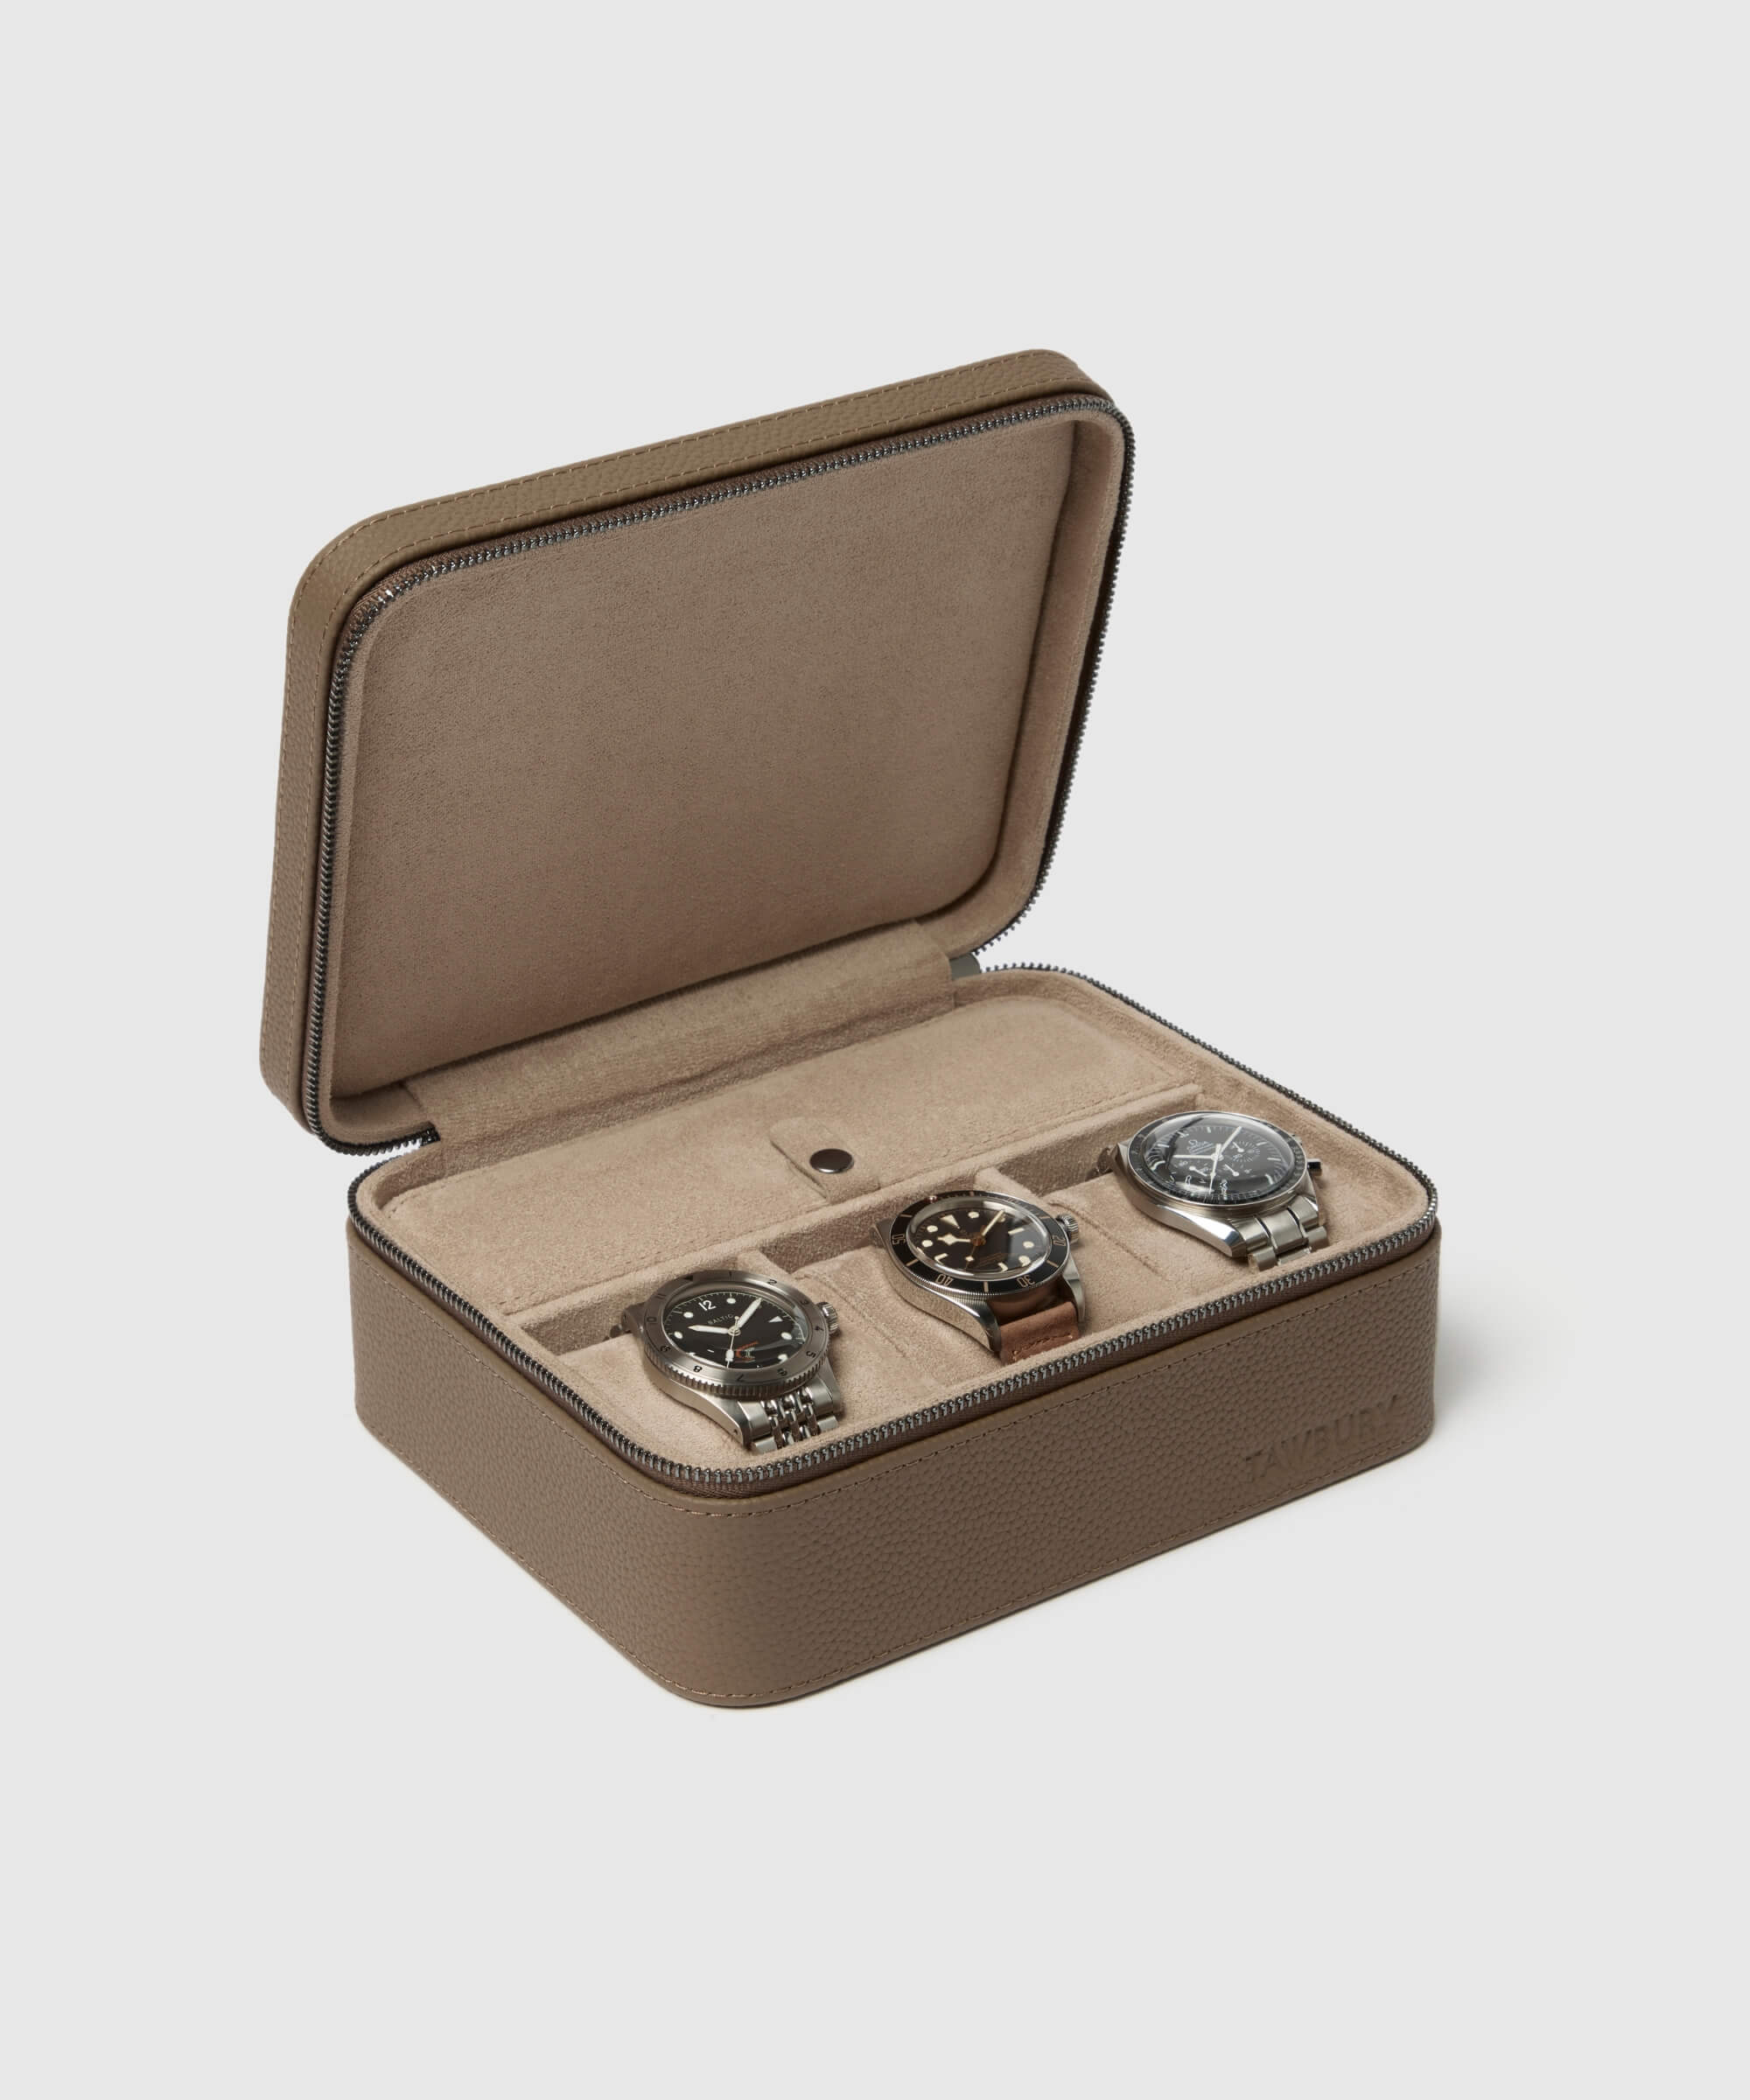 TAWBURY Fraser 3 Watch Travel Case with Storage - Taupe, offering protection for watch lovers.